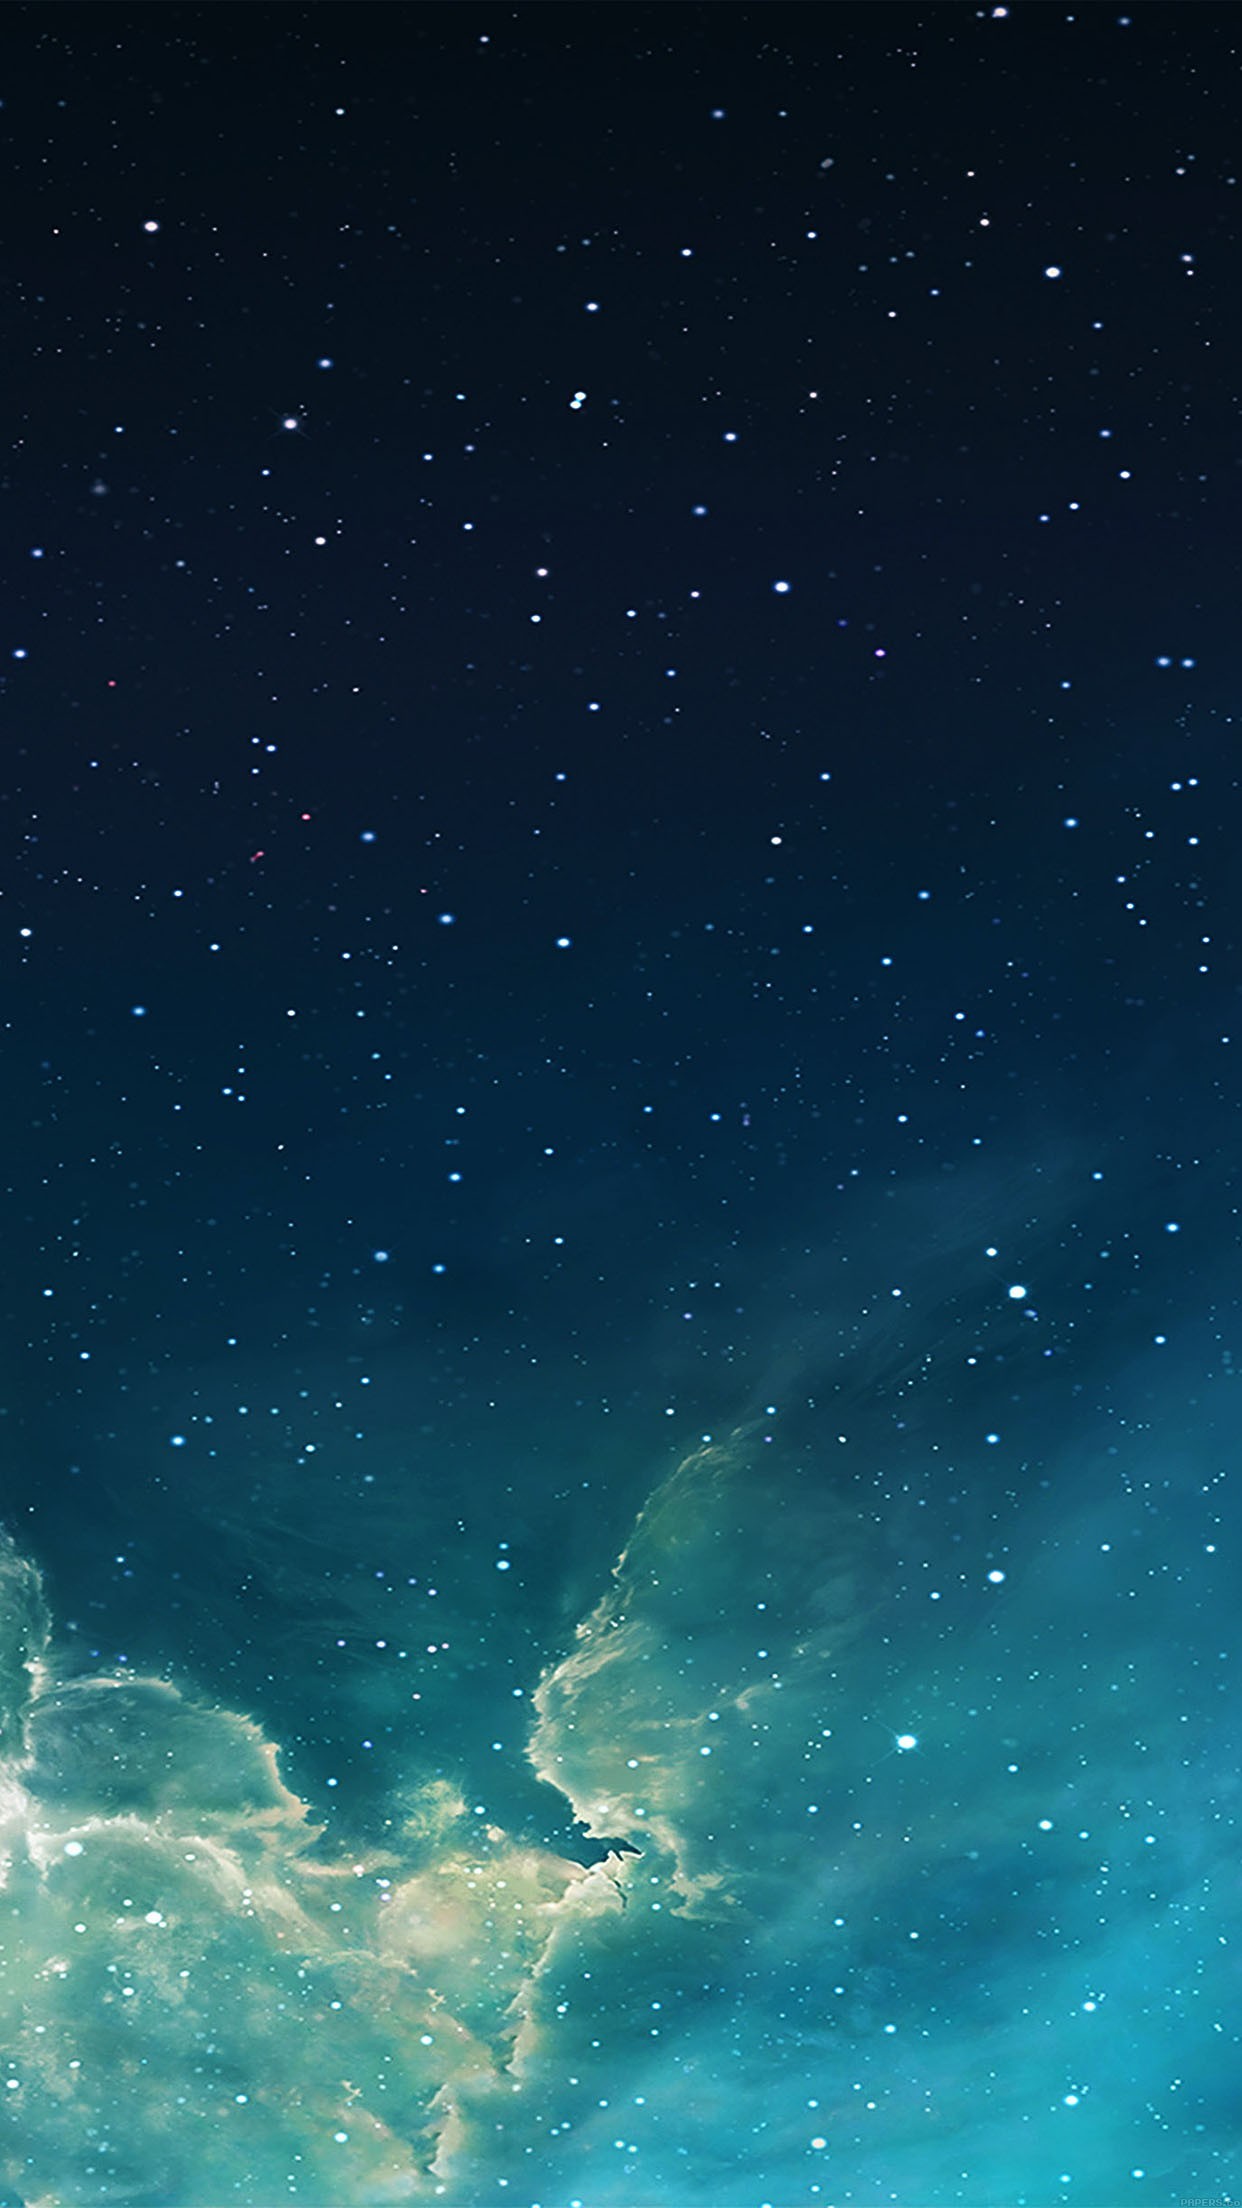 Wallpaper galaxy blue 7 starry star sky iphone 6 plus wallpapers – daily best